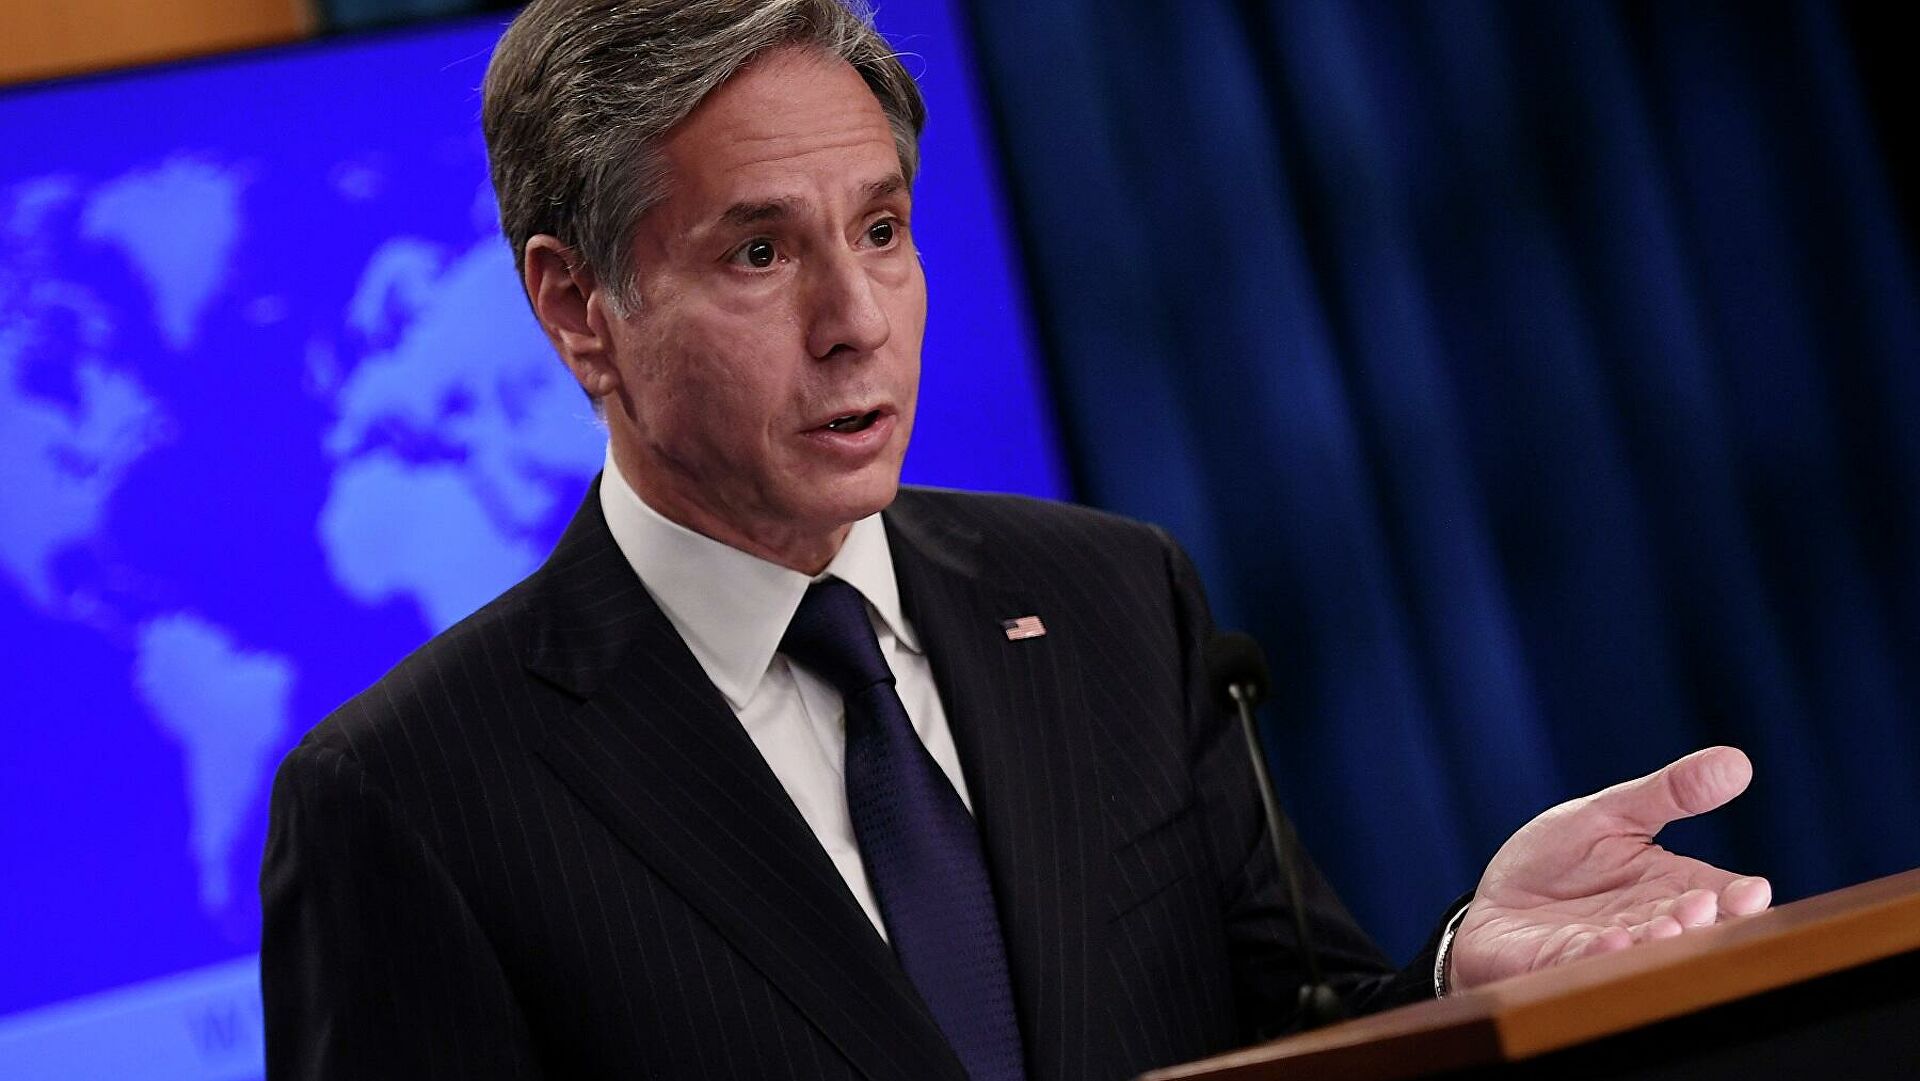 U.S. Secretary of State Blinken refuses to comment on UK accusations against Russia